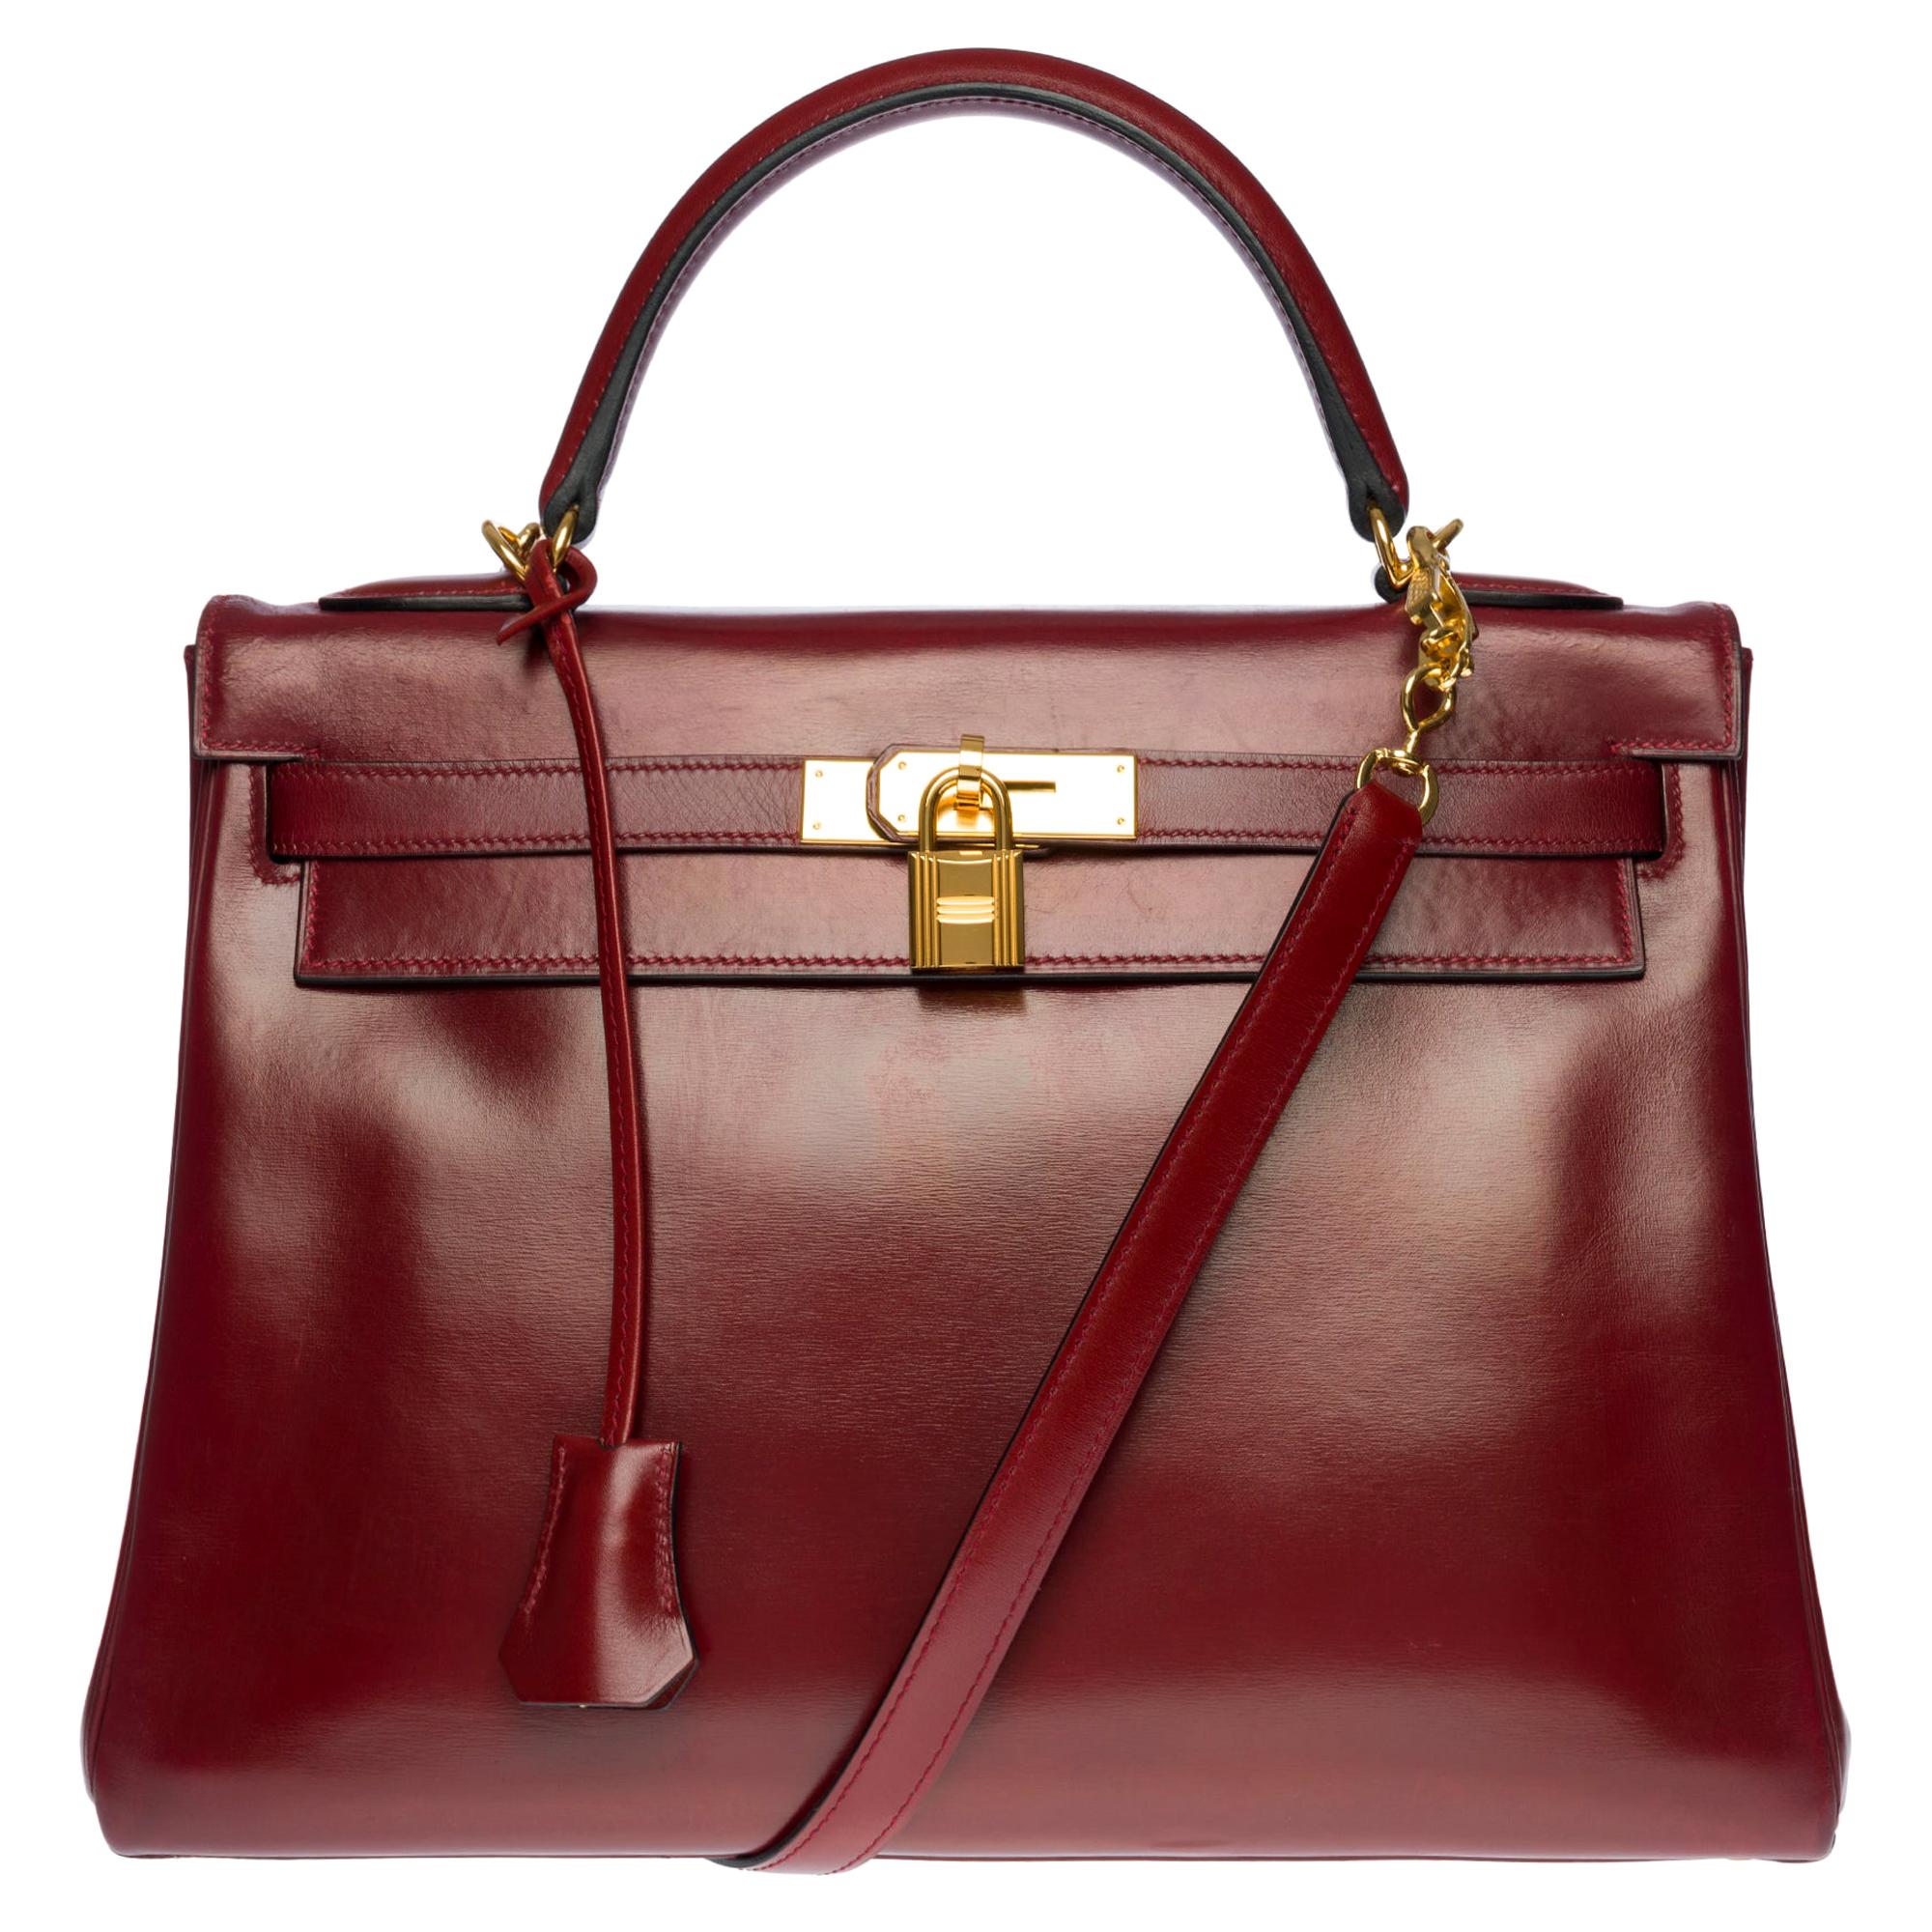 Hermès Kelly 32cm handbag with strap in burgundy calf leather and GHW